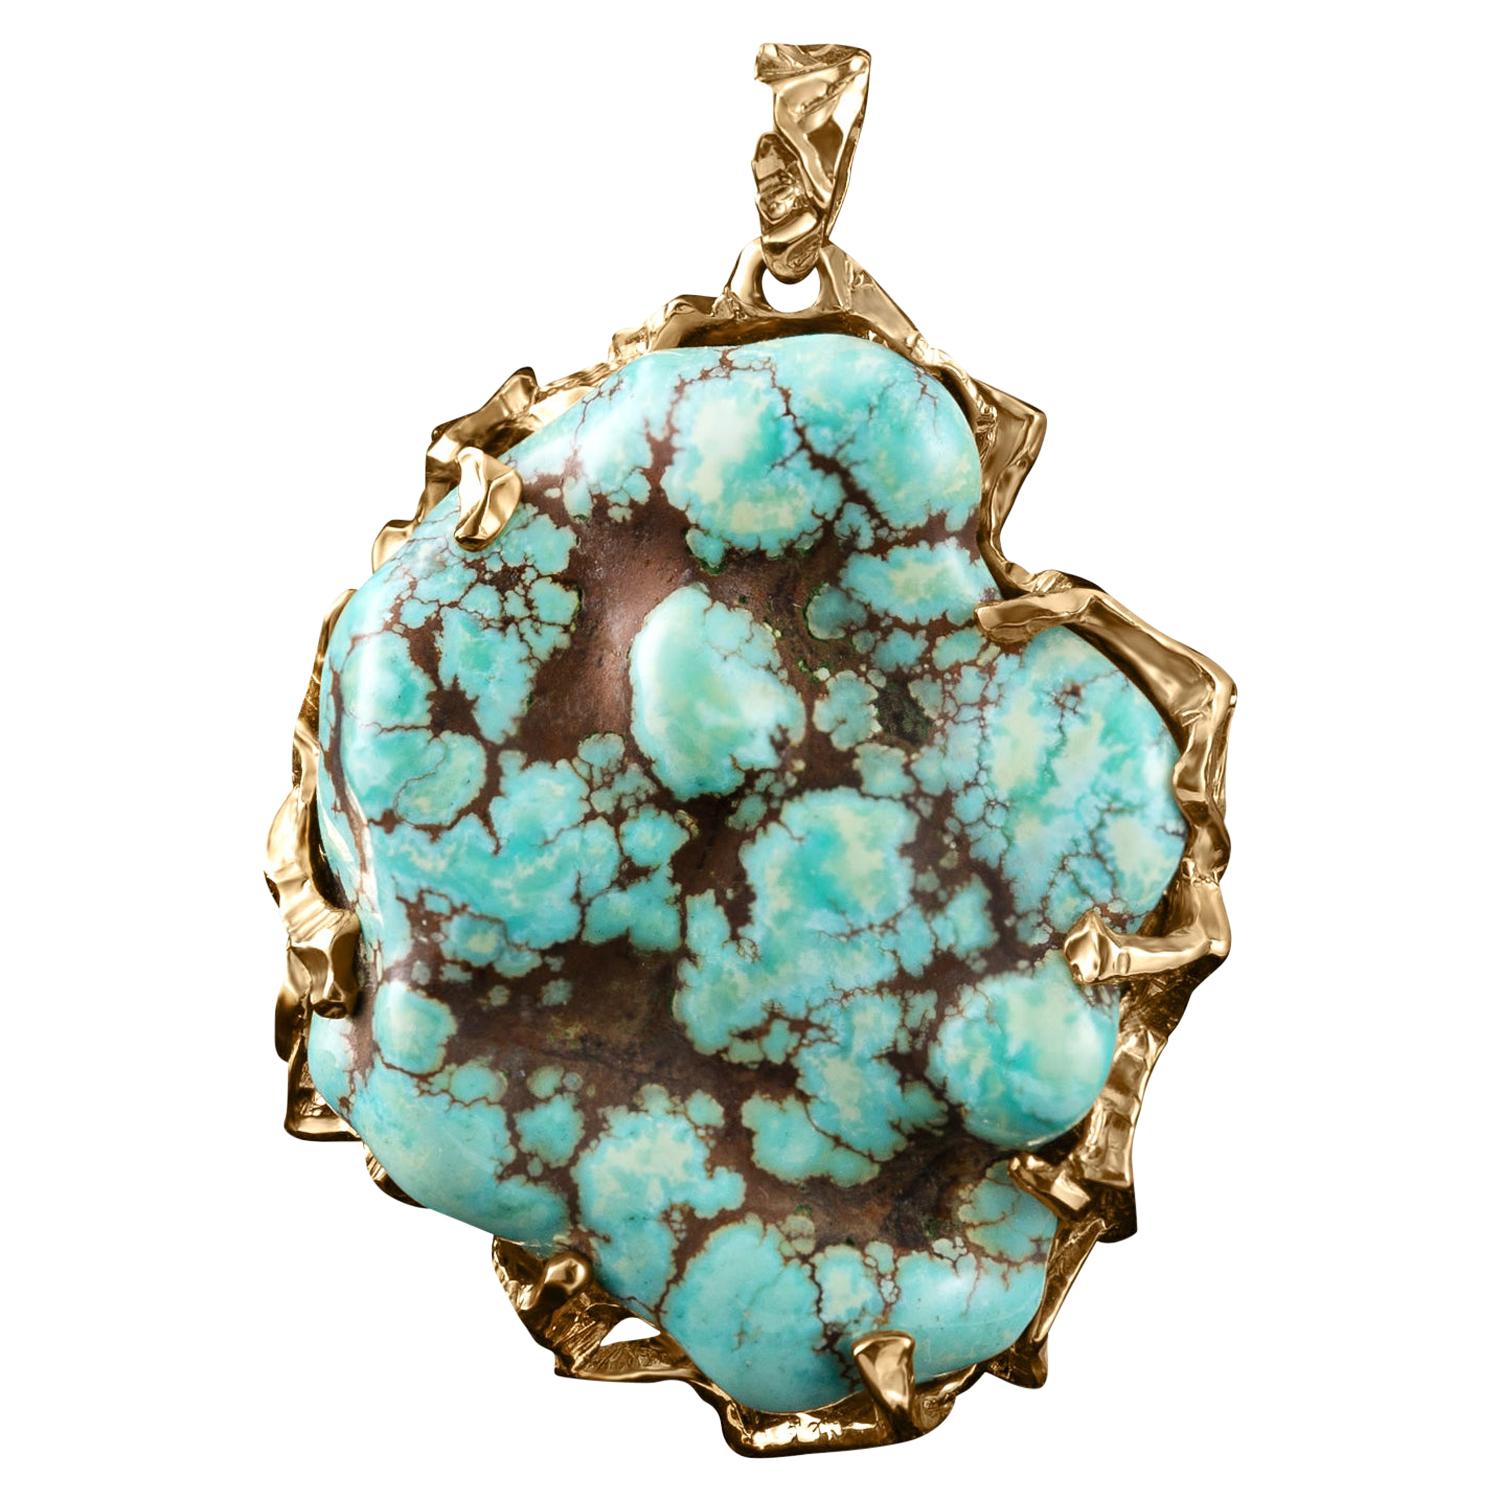 An amazing large 14K yellow gold necklace with natural lavender color Turquoise 
turquoise origin - Golden Hills mine, Kazakhstan
stone measurements - 0.35 х 1.26 х 1.54 in / 9 х 32 х 39 mm
stone weight - 58 carats
pendant weight - 20.50